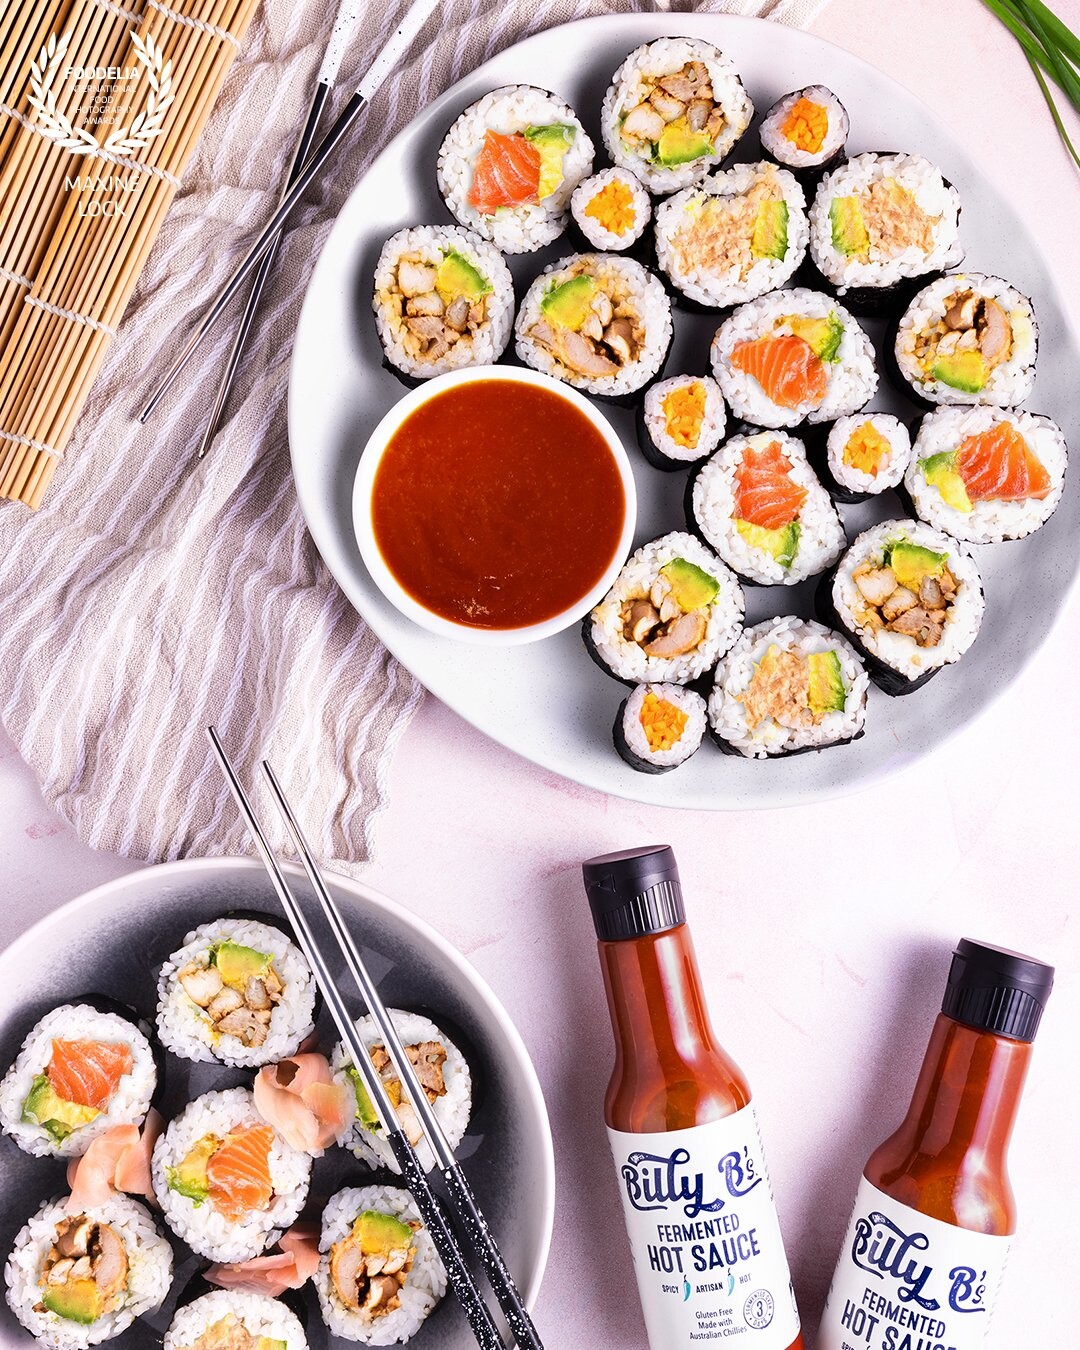 Photoshoot for a hot sauce brand, with sushi dishes on the side as a way to compliment the sauce. Also a way to introduce that the hot sauce, which contains traces of fish sauce, will go well with sushi dishes.